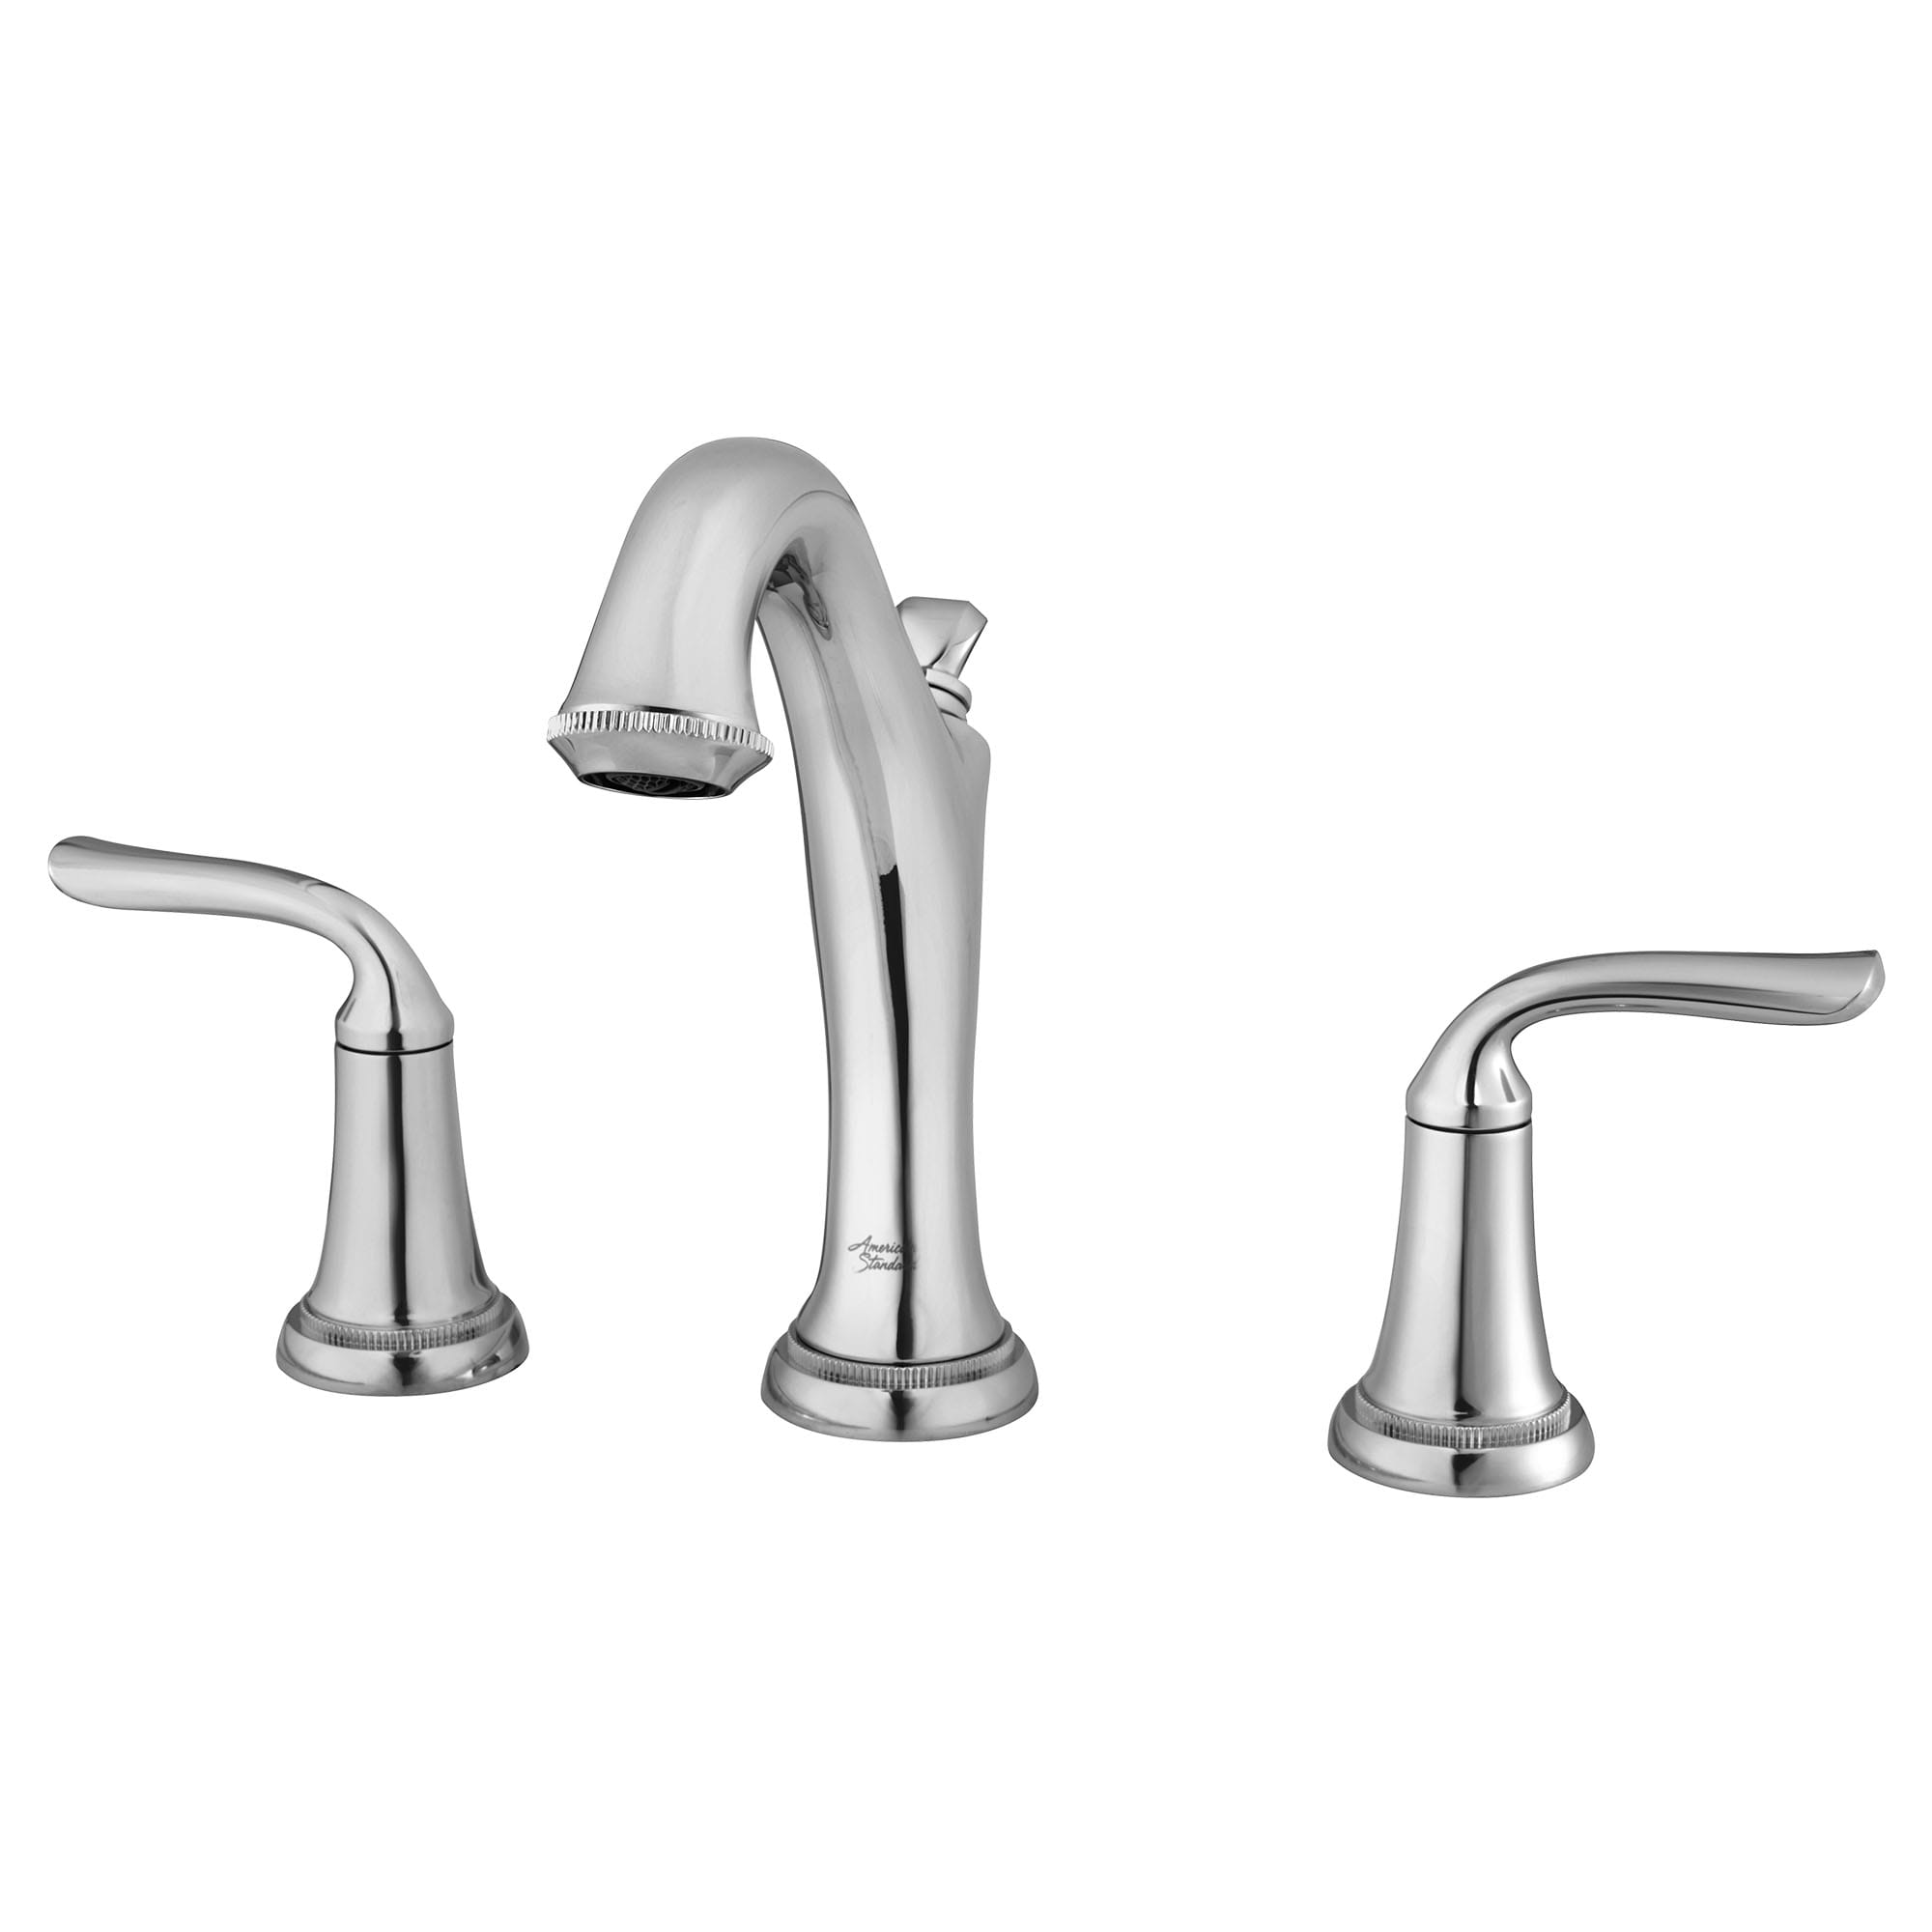 Patience 8 Inch Widespread 2 Handle Bathroom Faucet 12 gpm 45 L min With Lever Handles CHROME